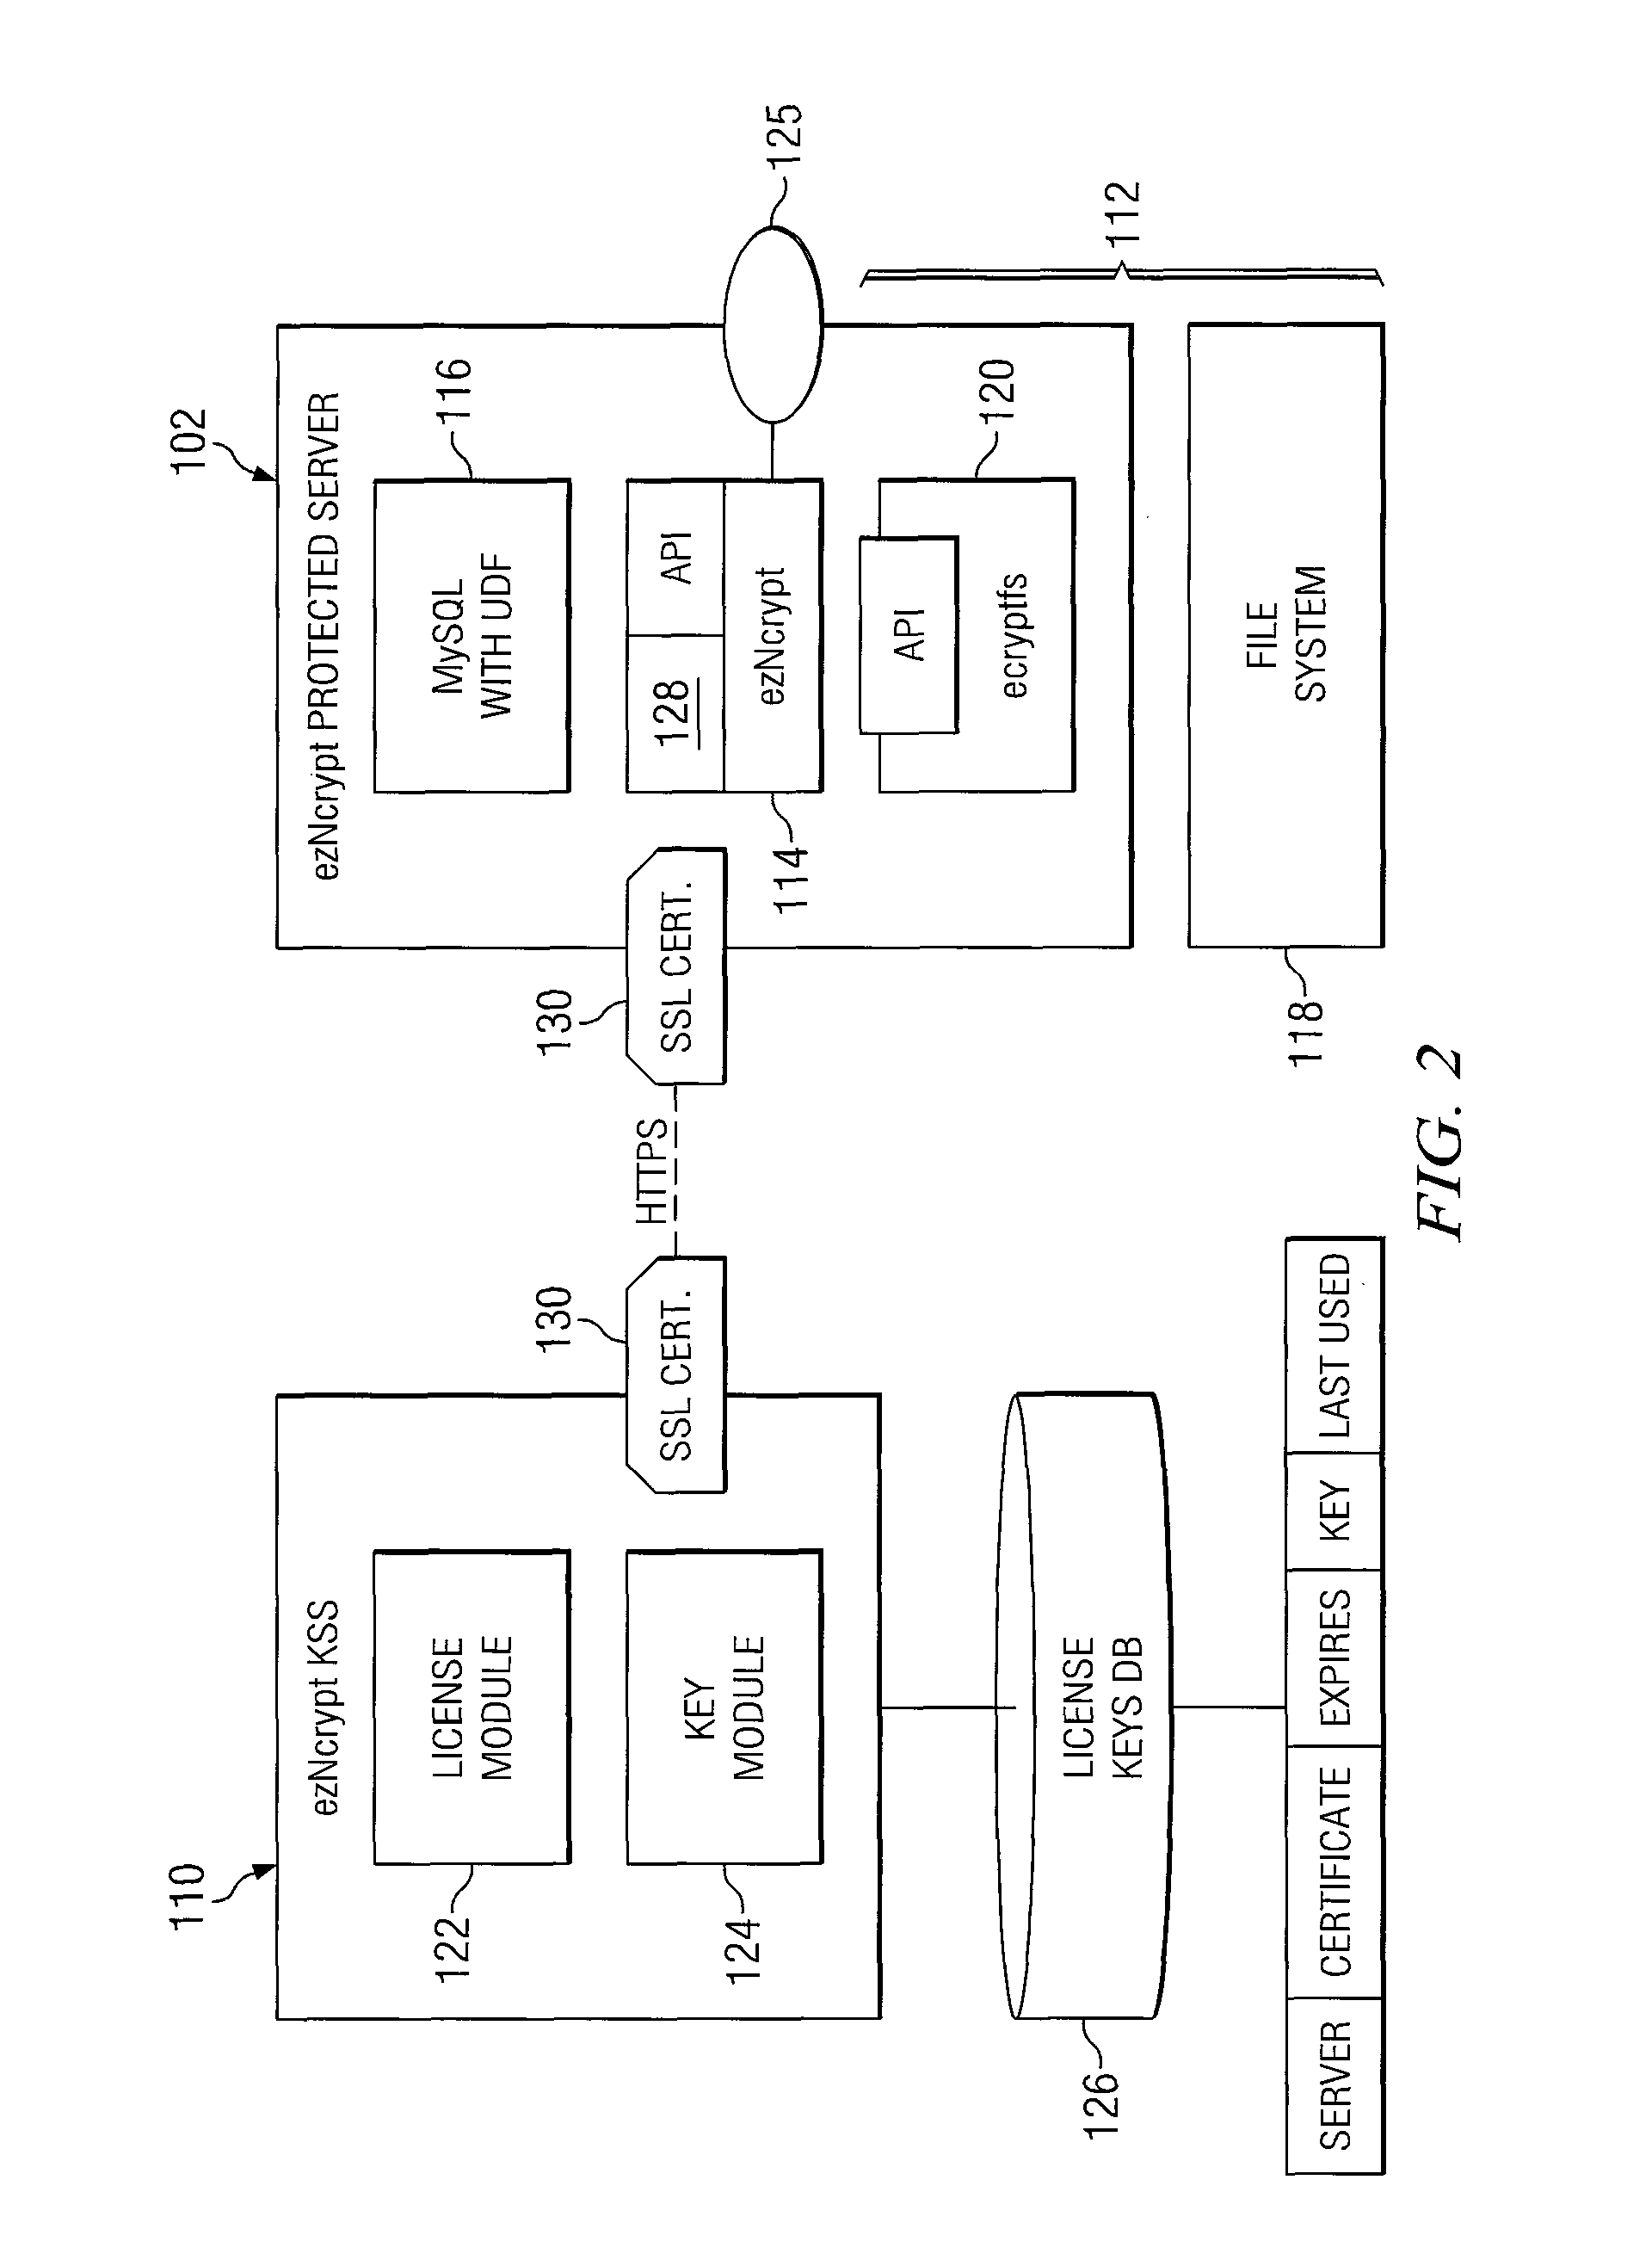 System and method for communicating with a key management system